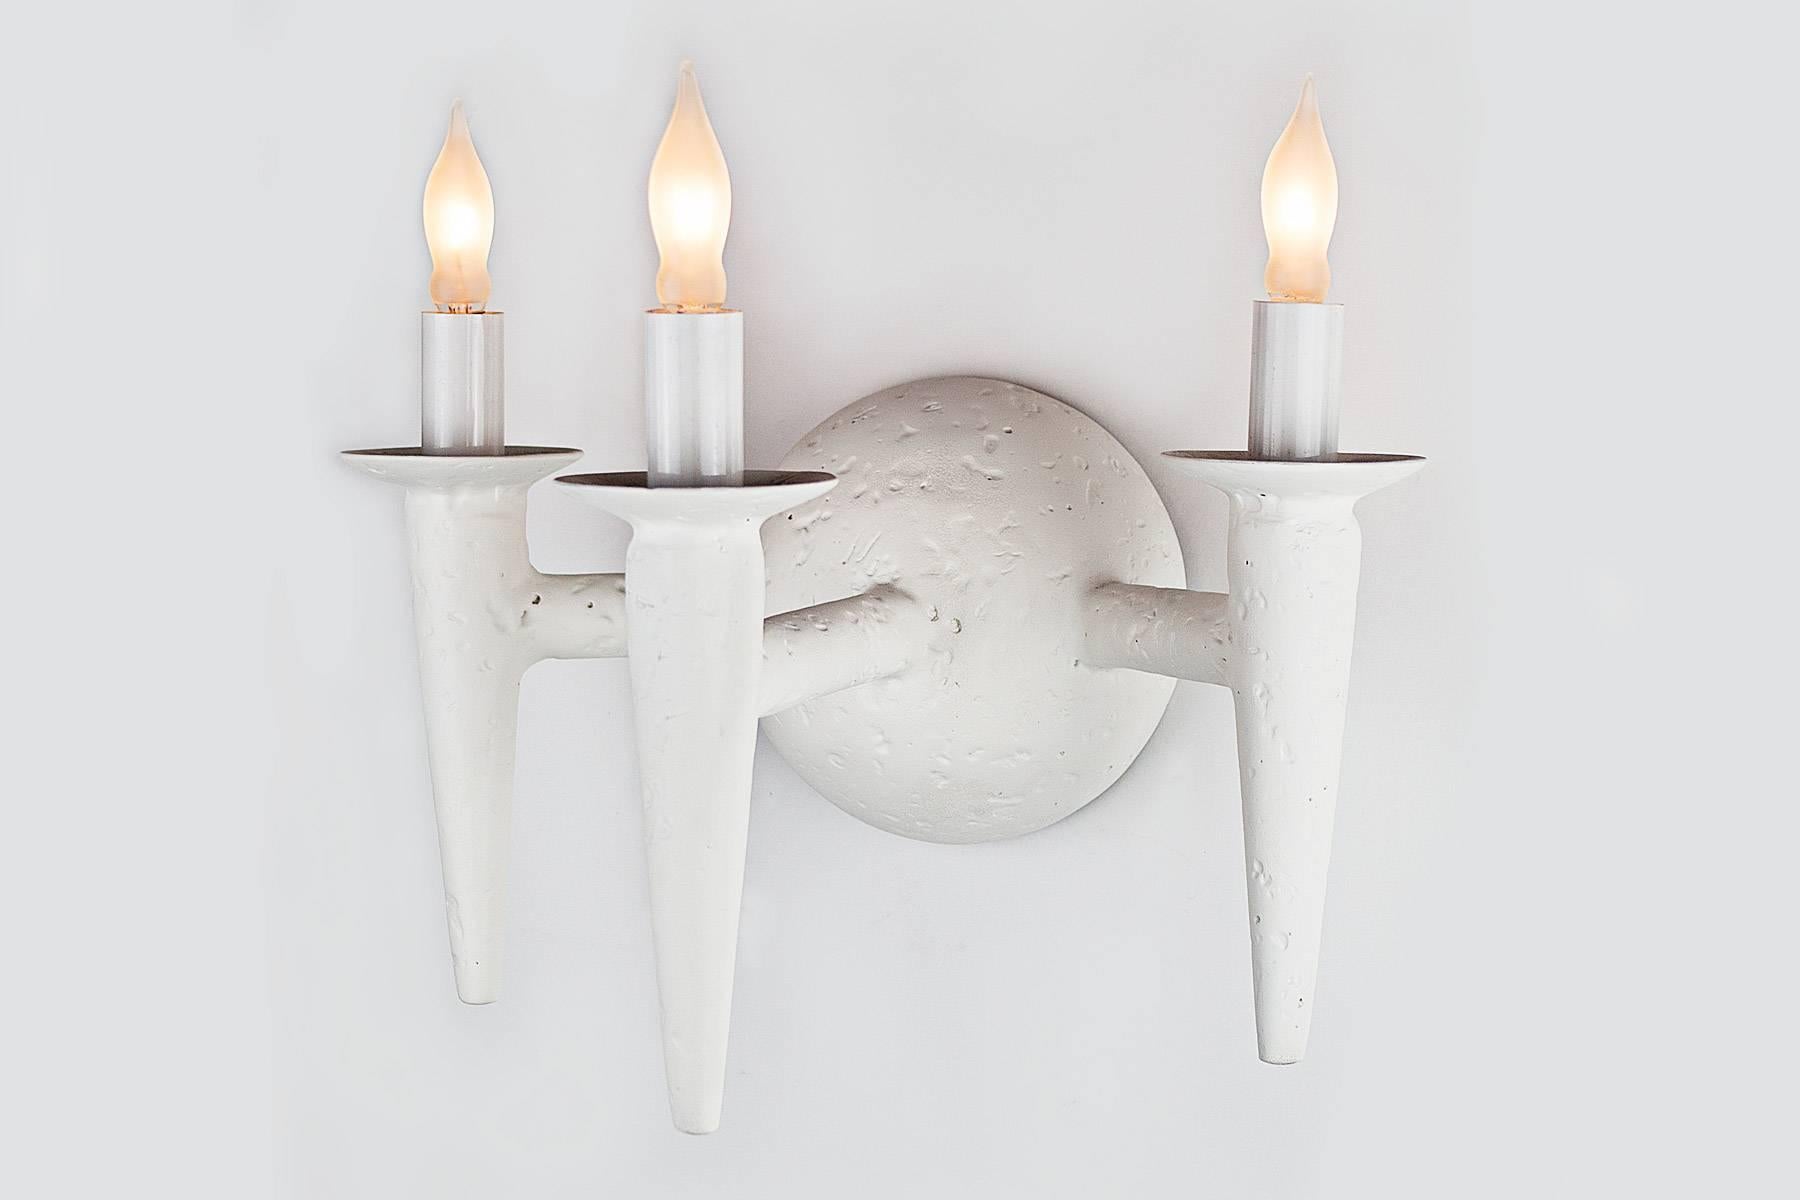 Two wall sconce with plaster finish. Fixture uses three candelabra based bulbs, Max wattage 60 each. Lights fits on a standard J box.